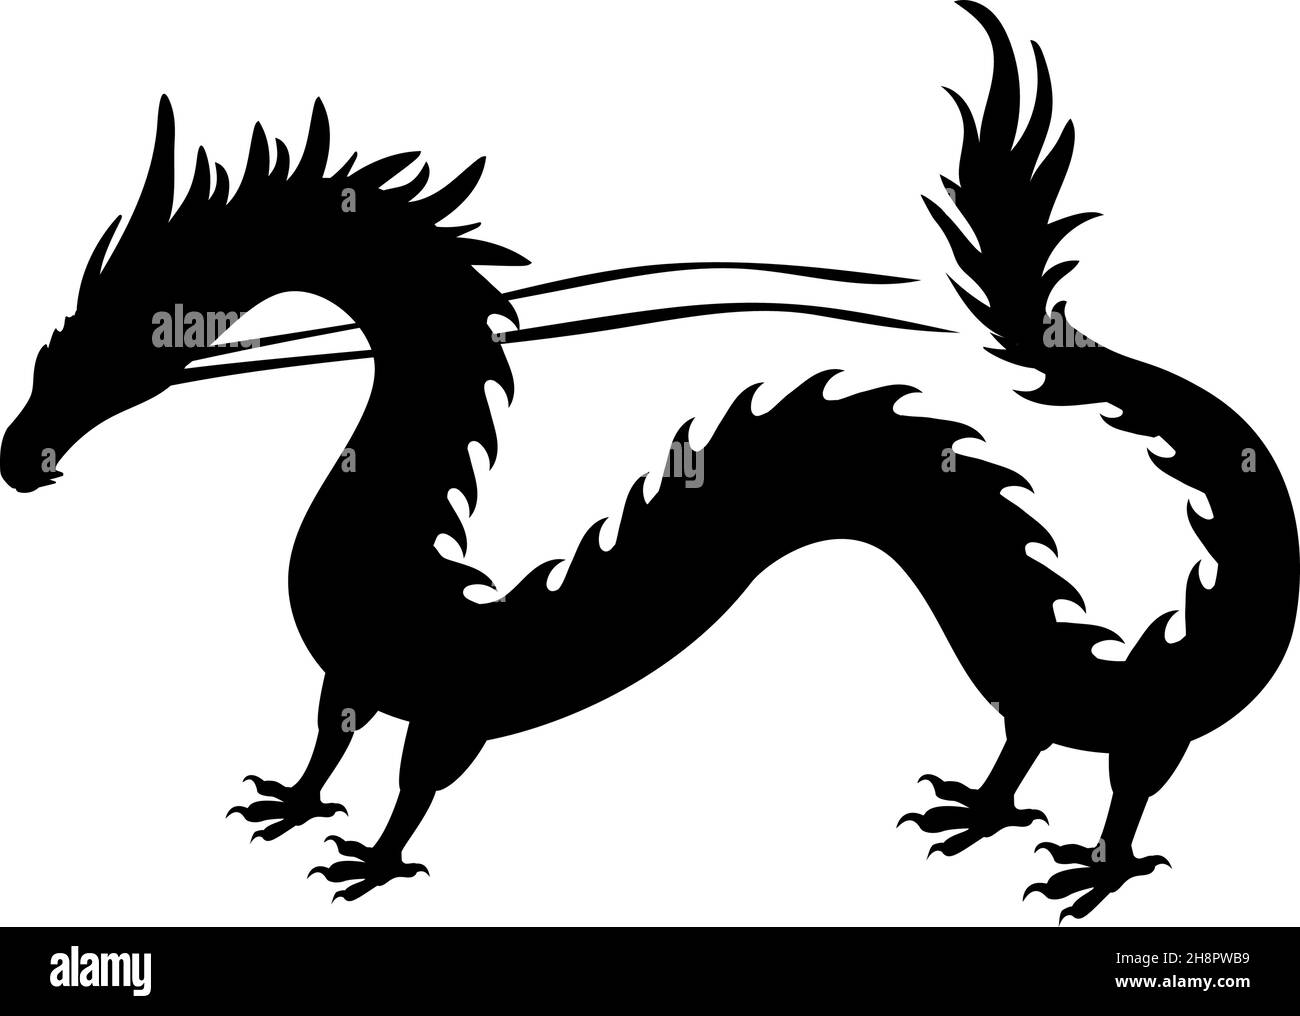 Silhouette dragon. Oriental folklore and mythology. Stock Vector